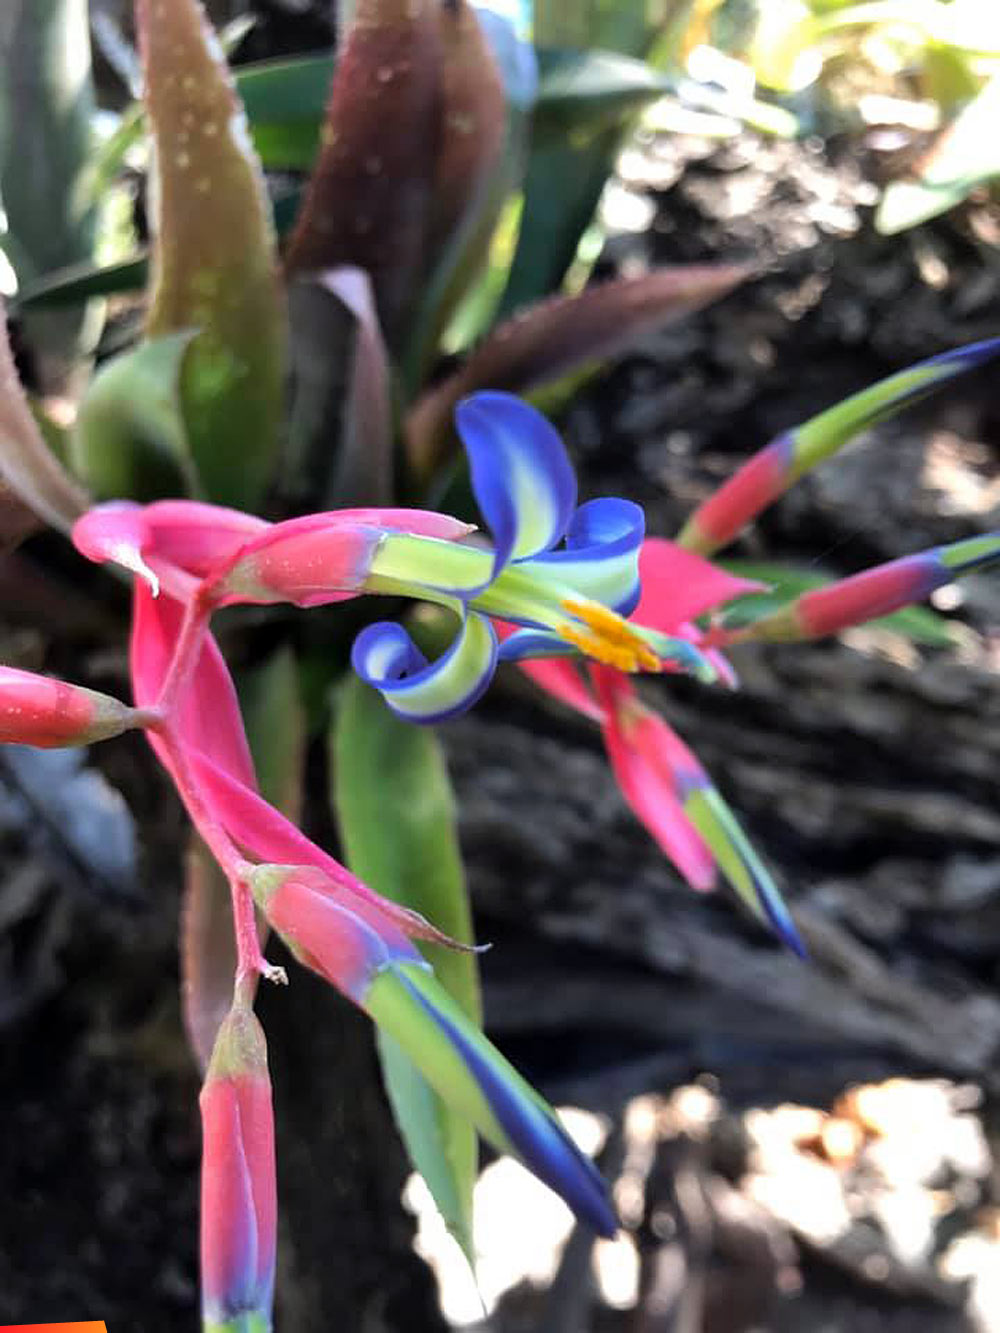 Billbergia Saundersii, also known as queen’s tears. Multi coloured bromeliad